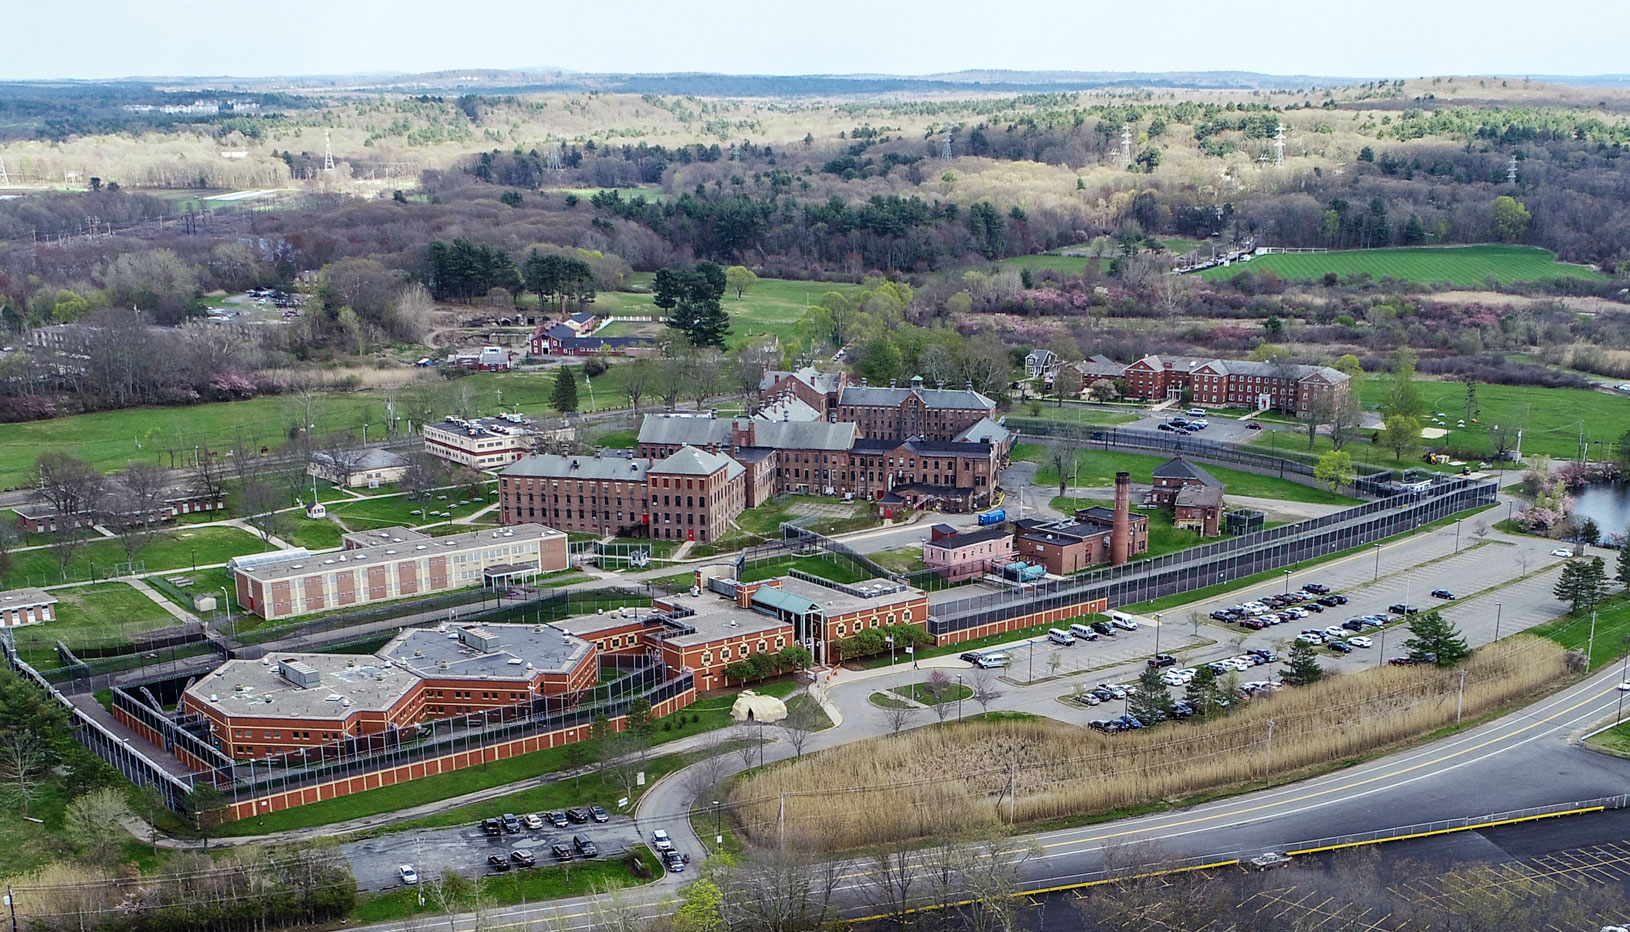  An arial view of MCI Framingham in Massachusetts